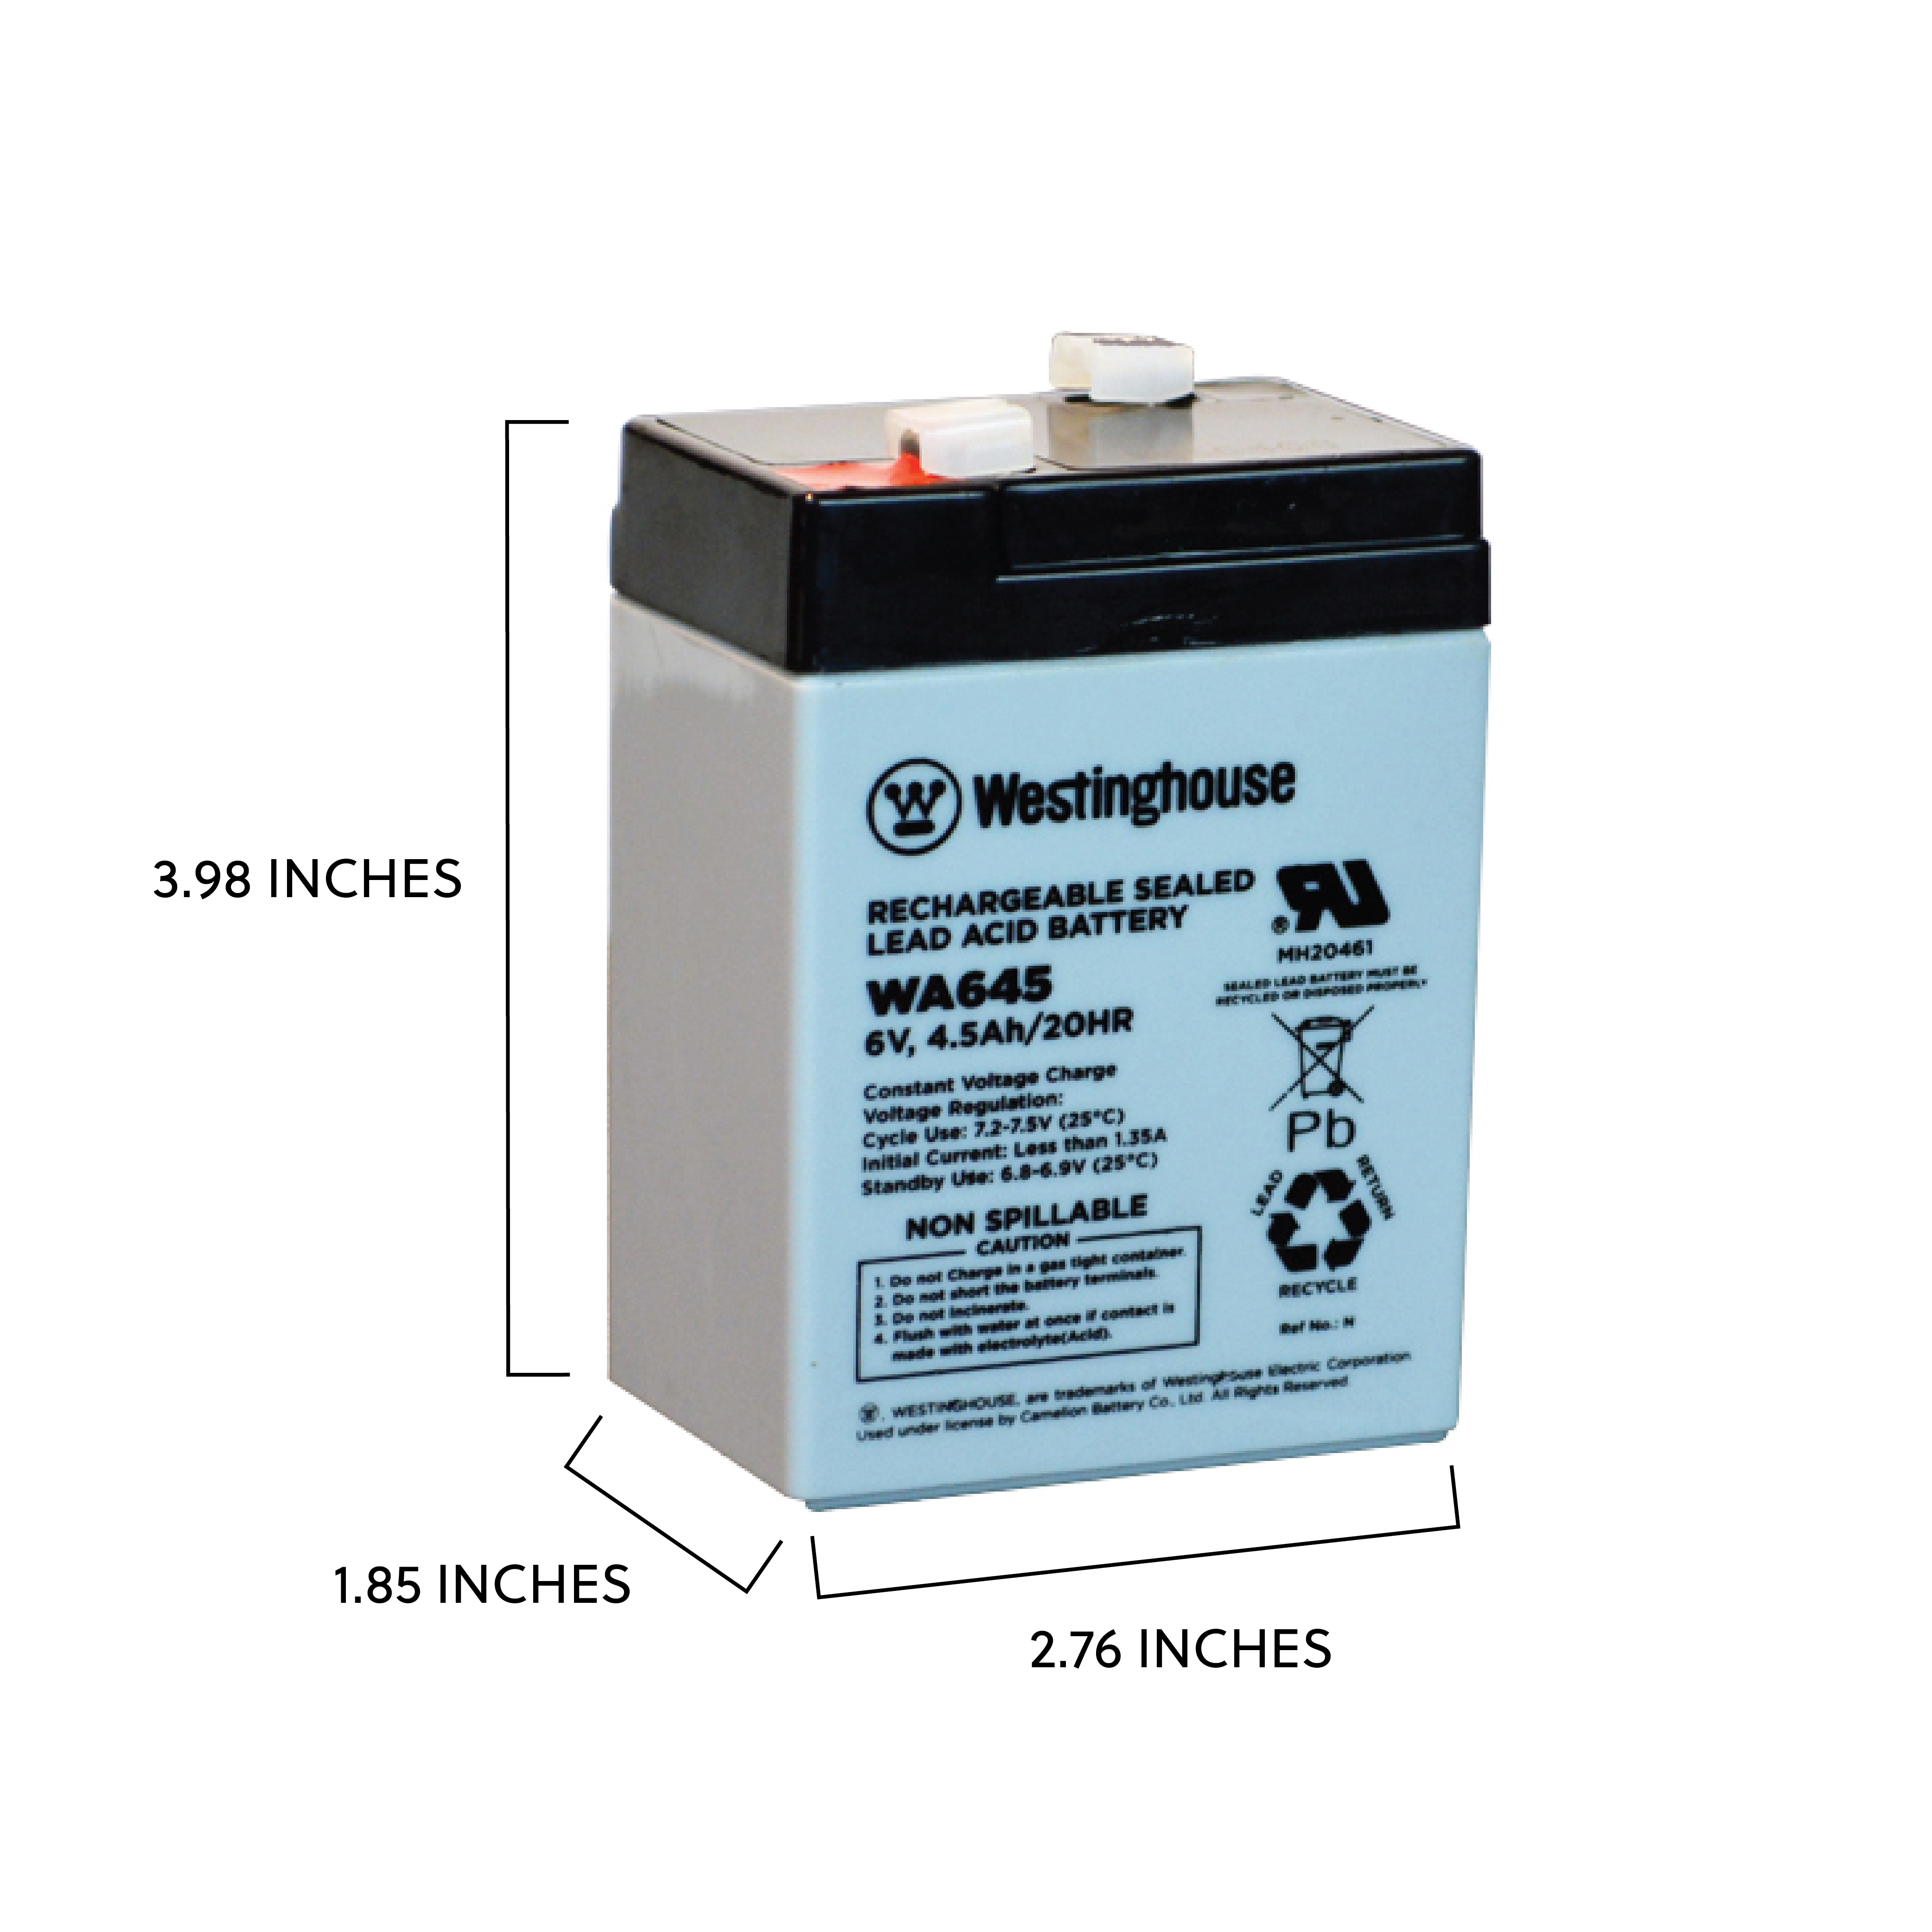 Westinghouse WA645-F1, 6V 4.5Ah F1 Terminal, Sealed Lead Acid Rechargeable Battery